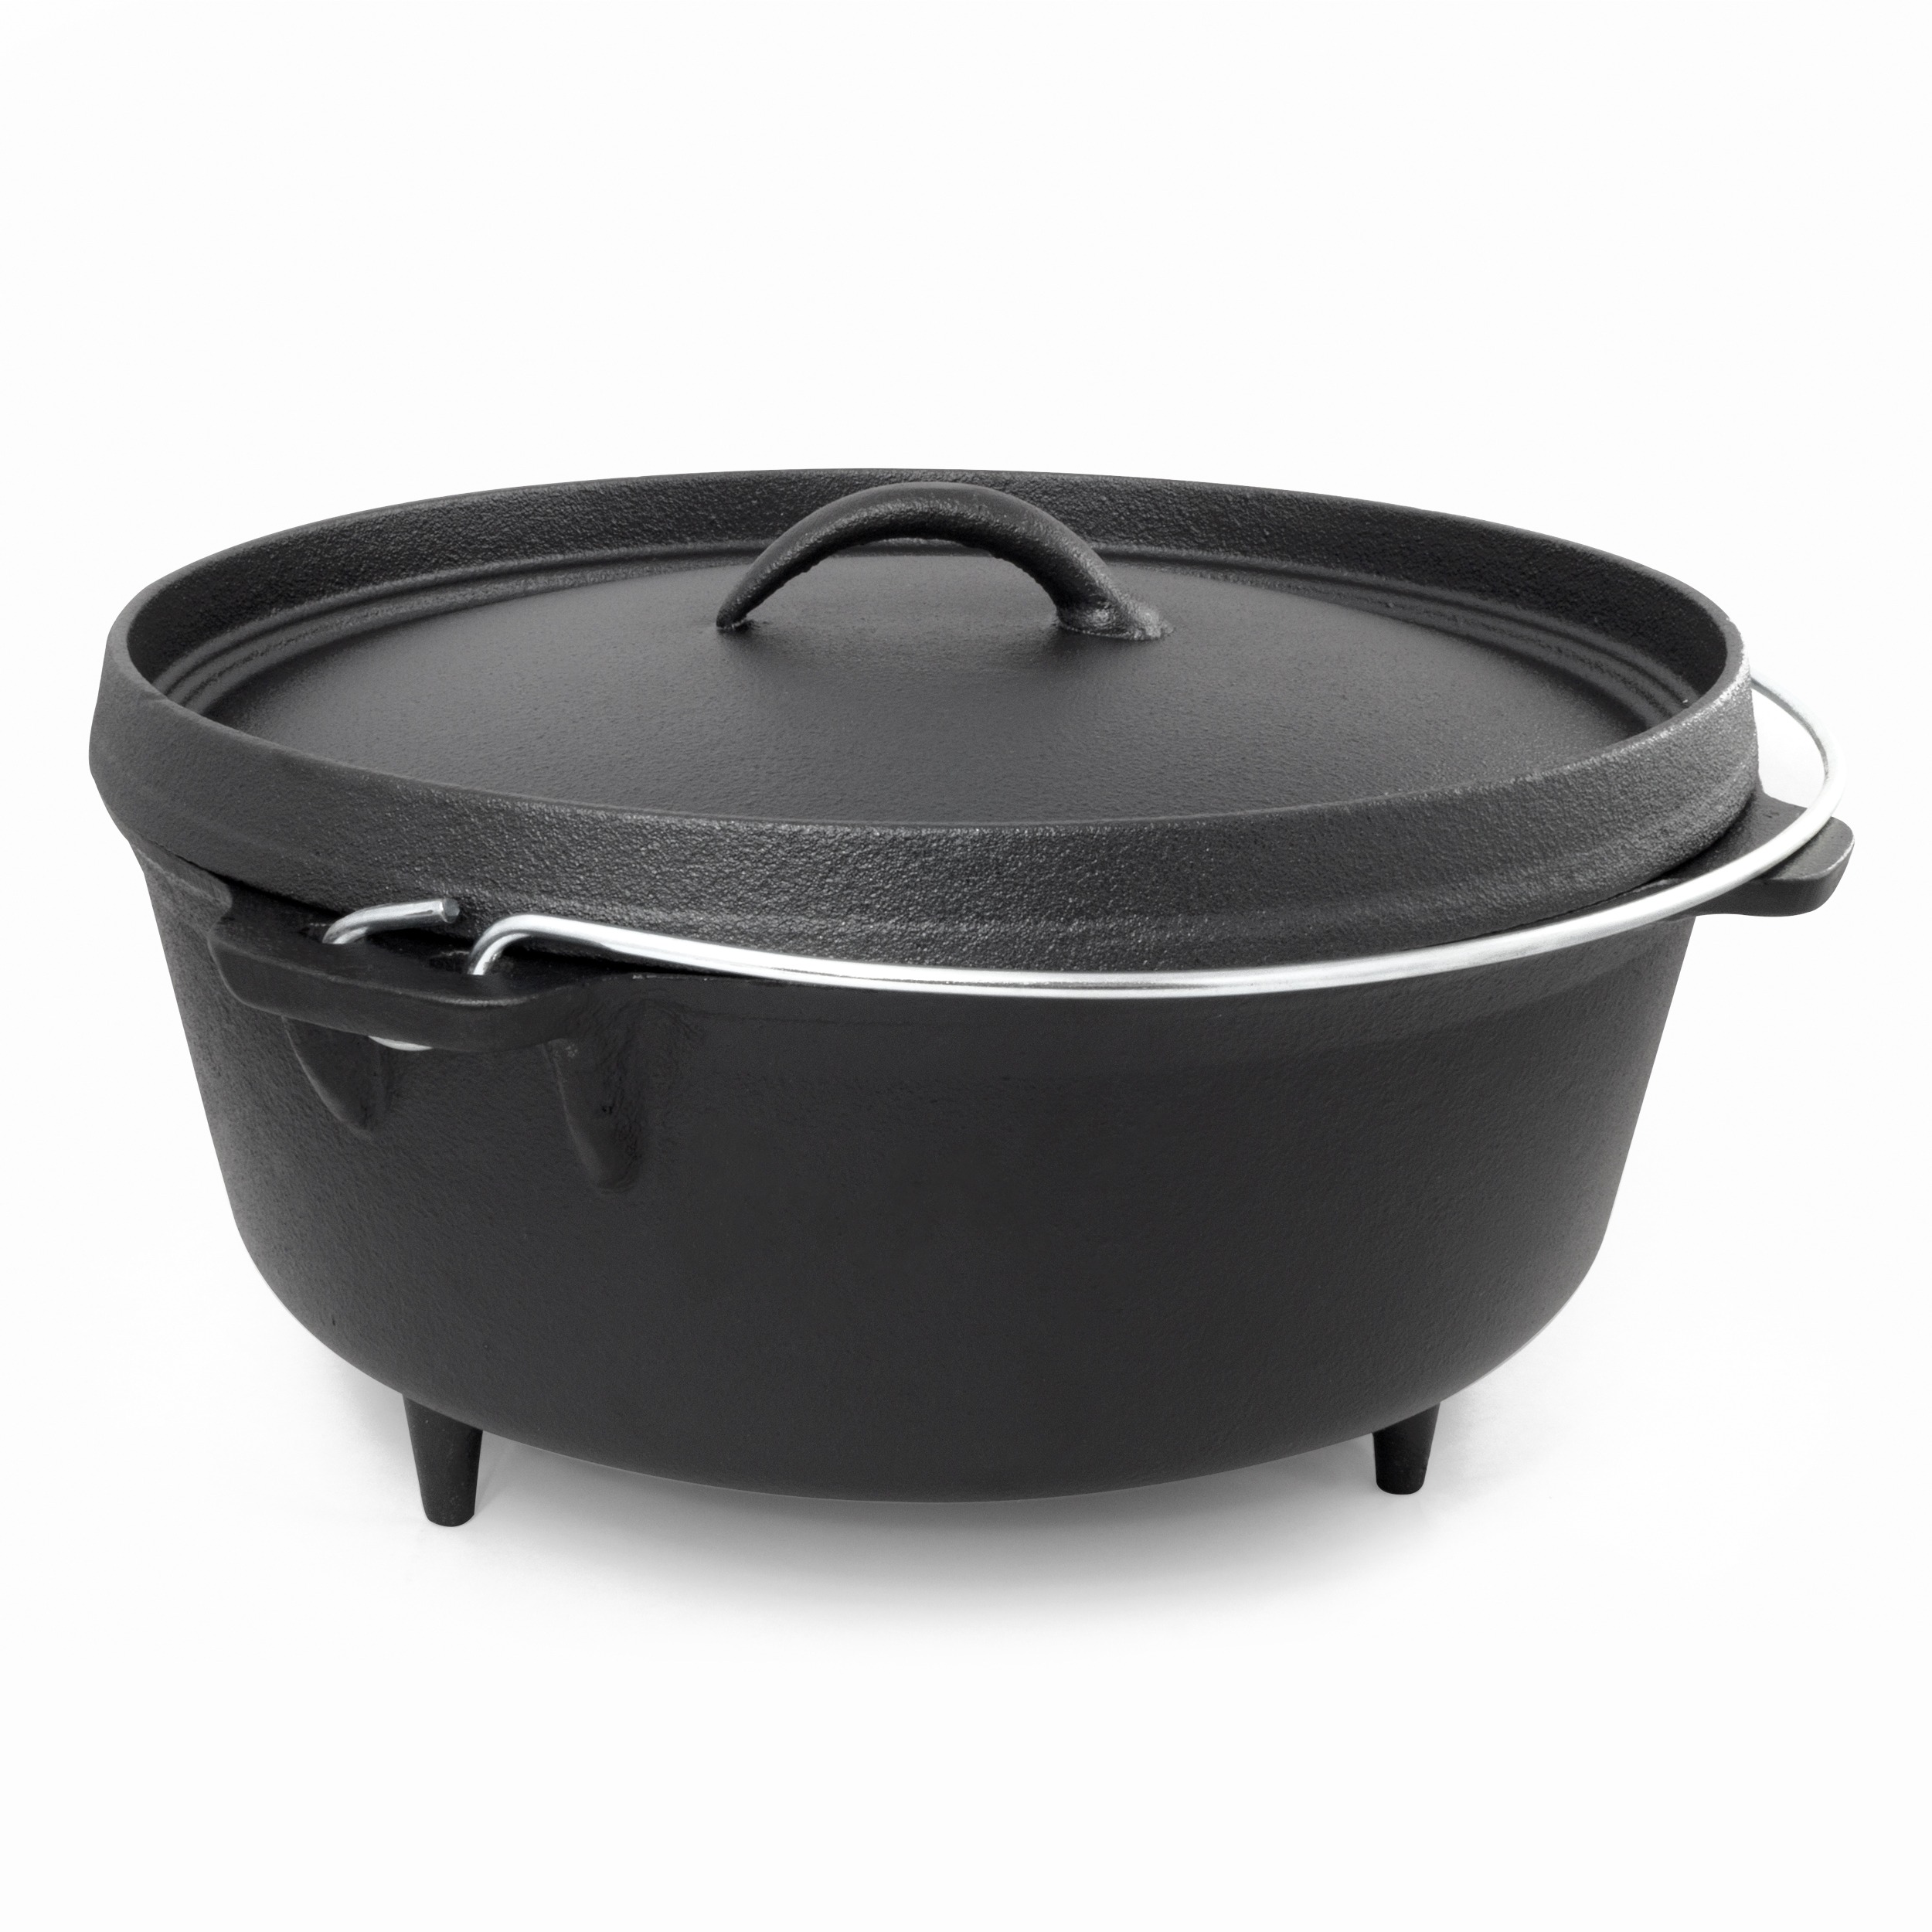 ExcelSteel w/Handle & Leg Base, Oil Seasoned Cooking Pot Perfect for Outdoor Kitchen Camping Dutch Oven Camper 6 QT Cast Iron, Black 356